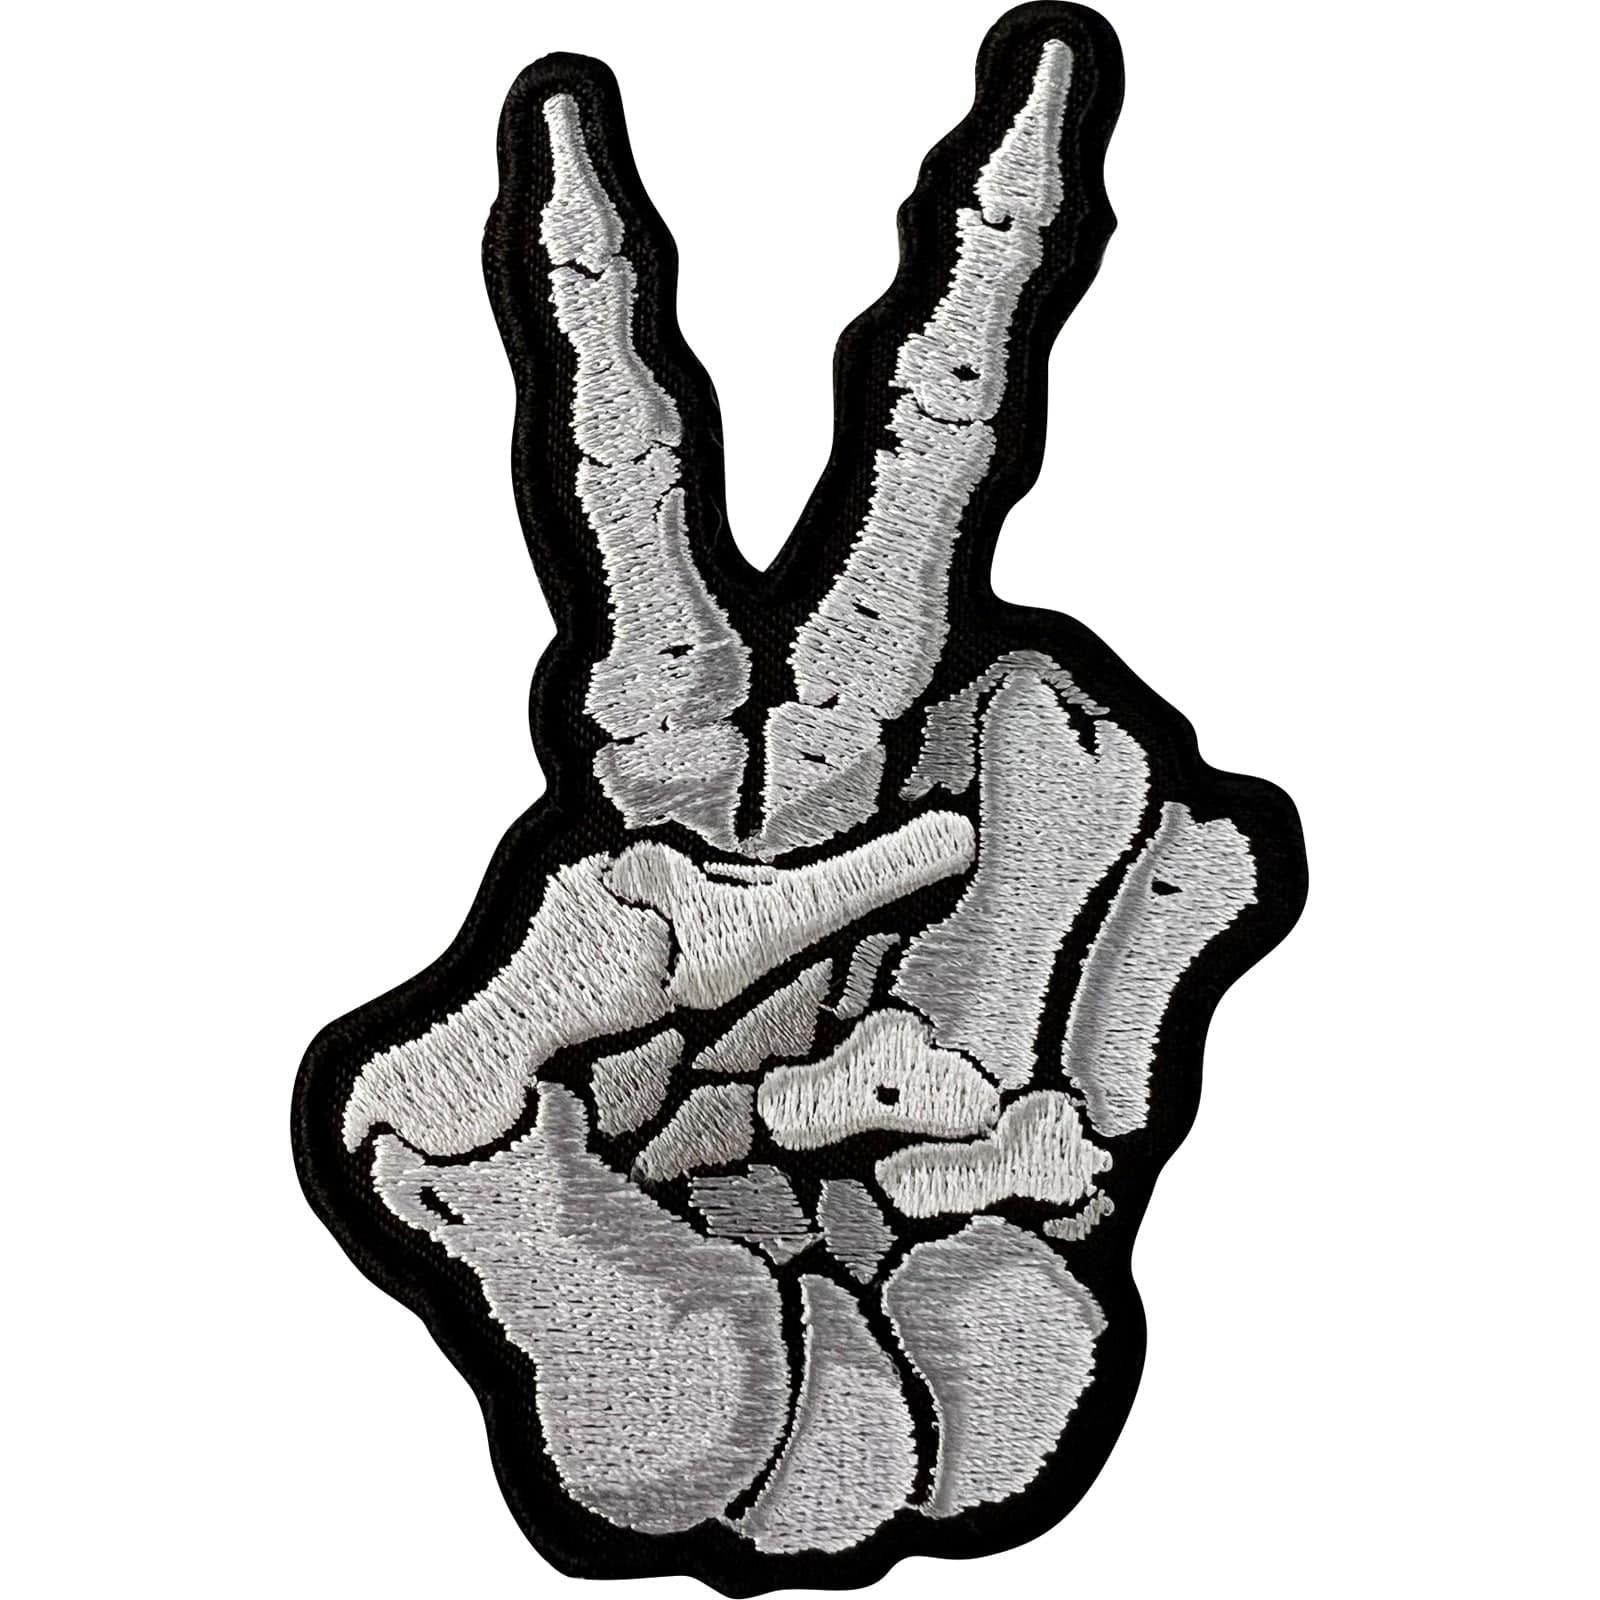 Skeleton Hand Peace V Sign Embroidery Patch Iron Sew On Cloth Embroidered Badge